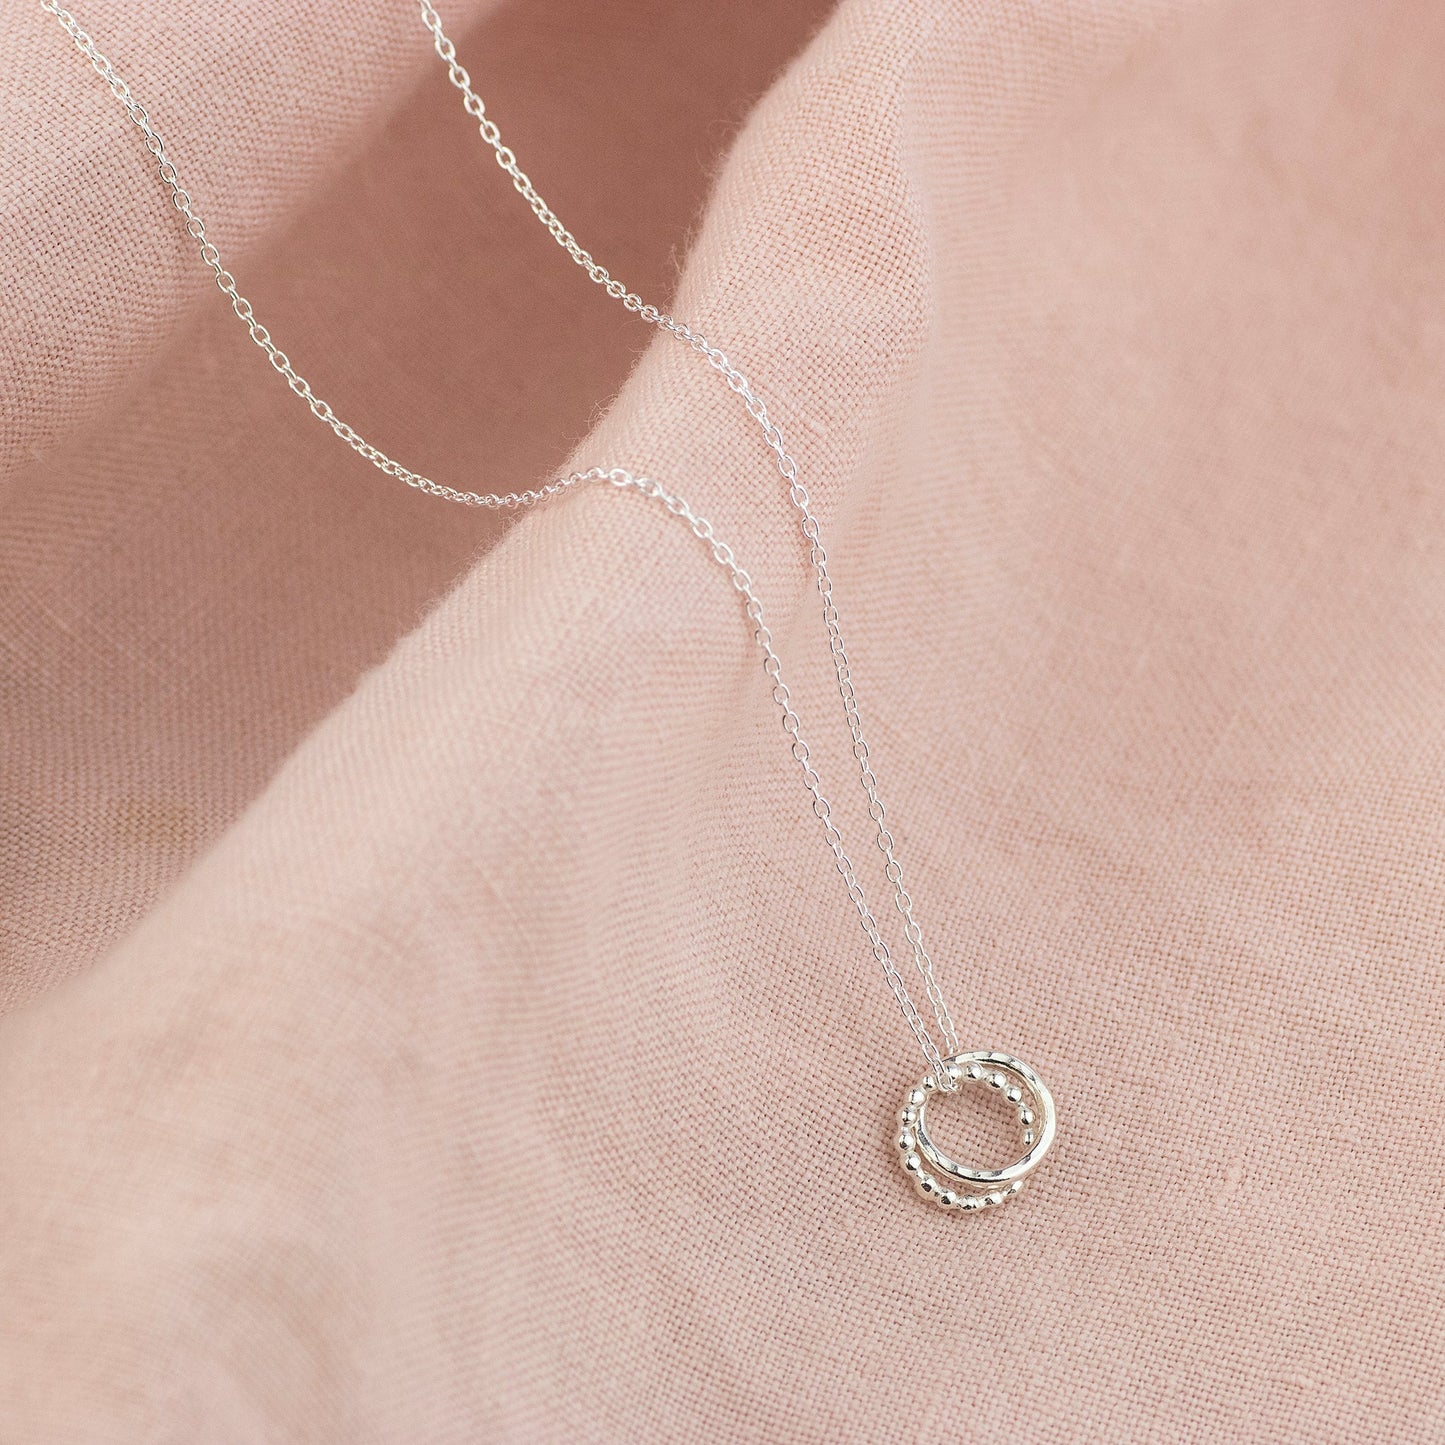 Gift for Granddaughter from Grandmother - Silver Love Knot Necklace